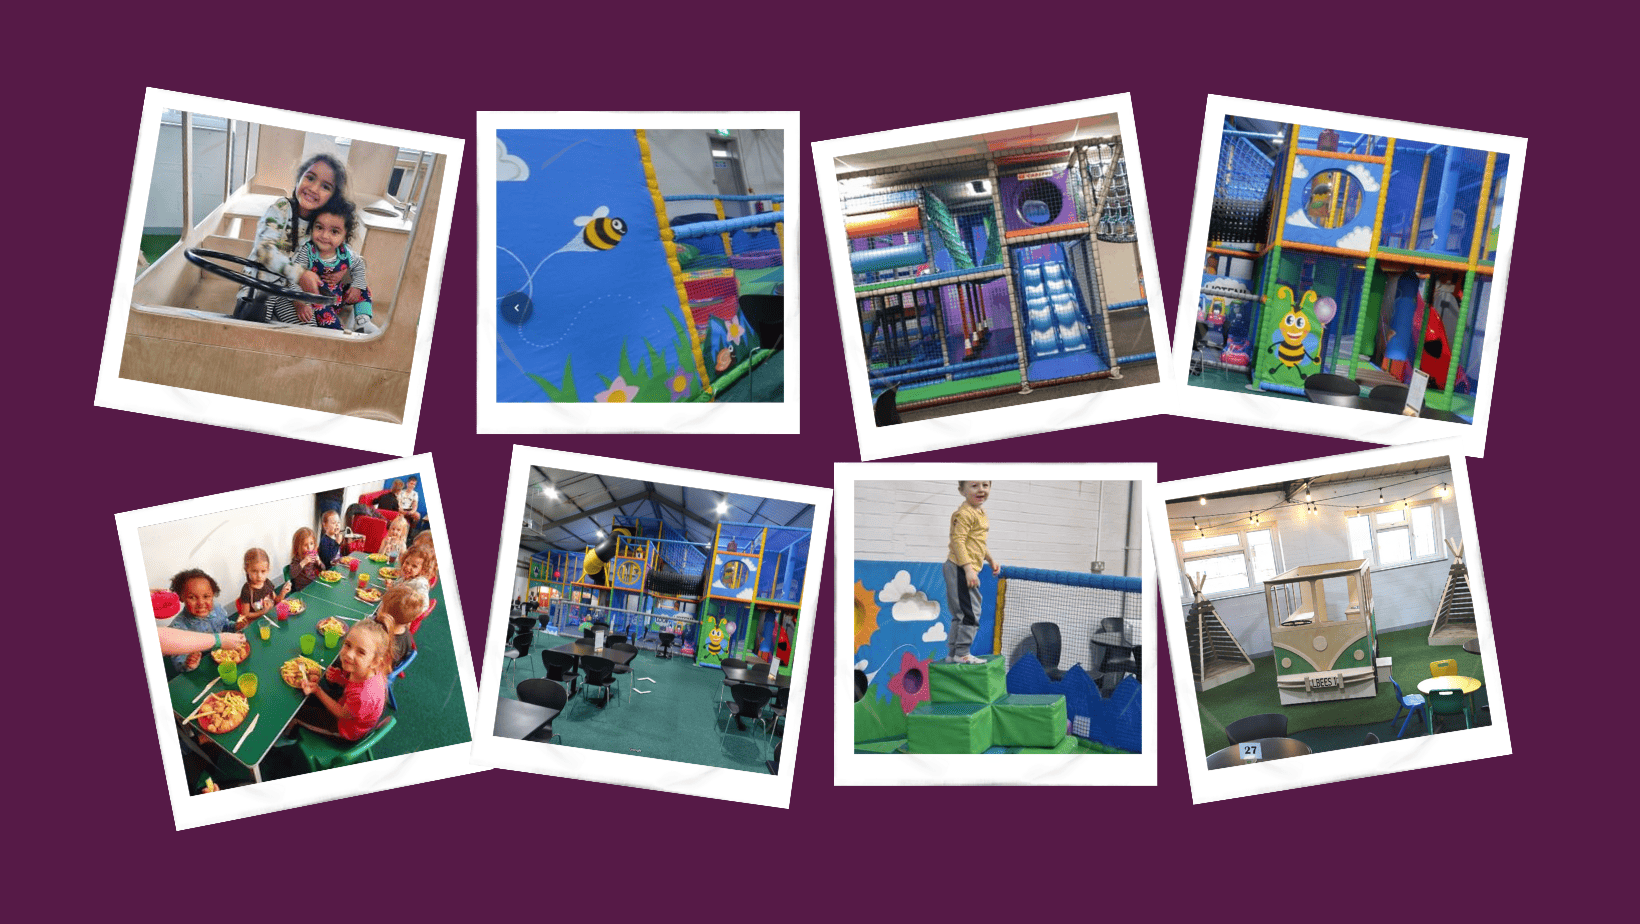 Soft play kids party at Little bees leeds slider image for party page